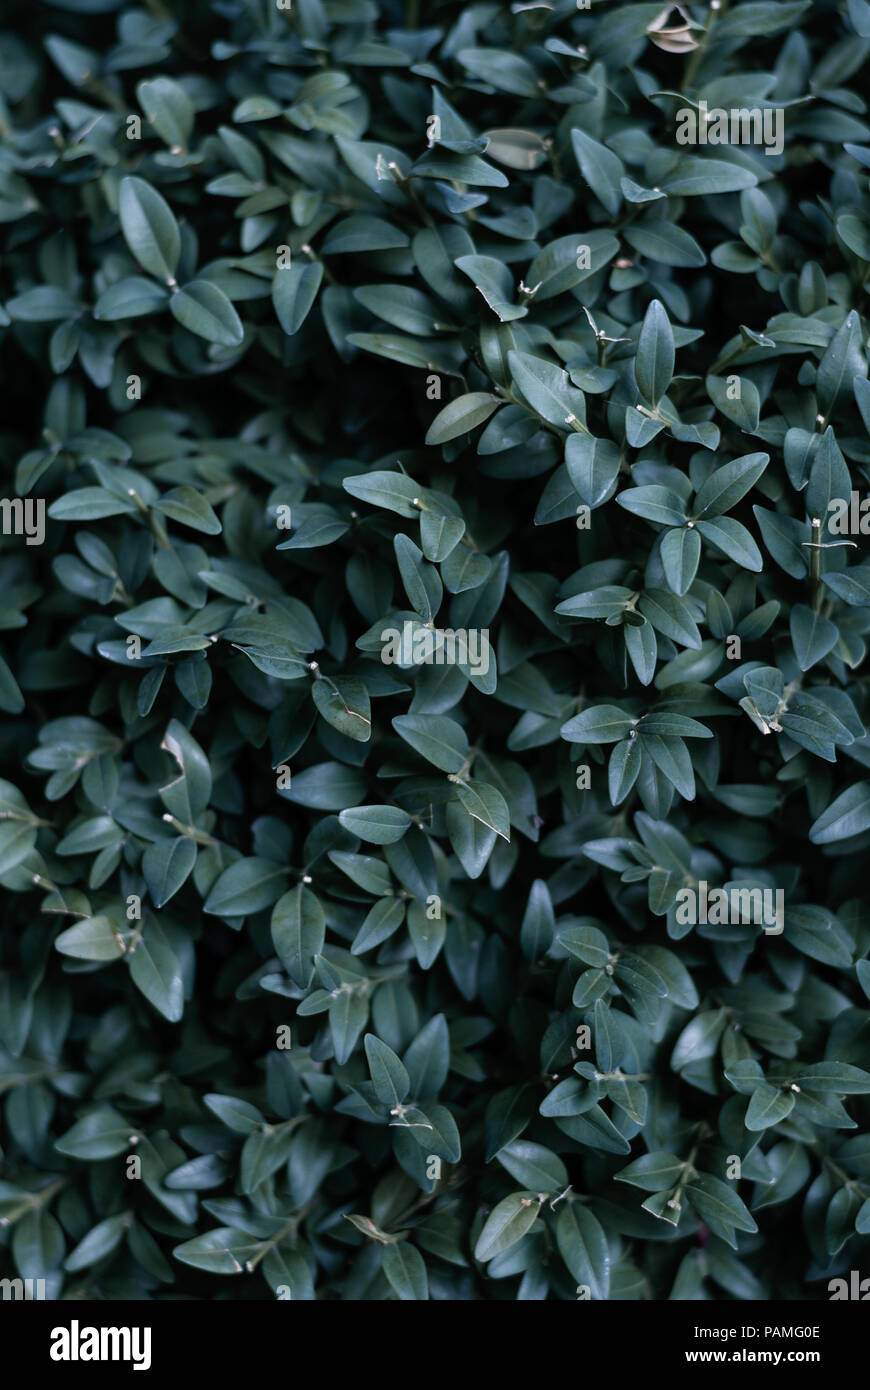 Buxus sempervirens bush - details and texture on the leaves Stock Photo